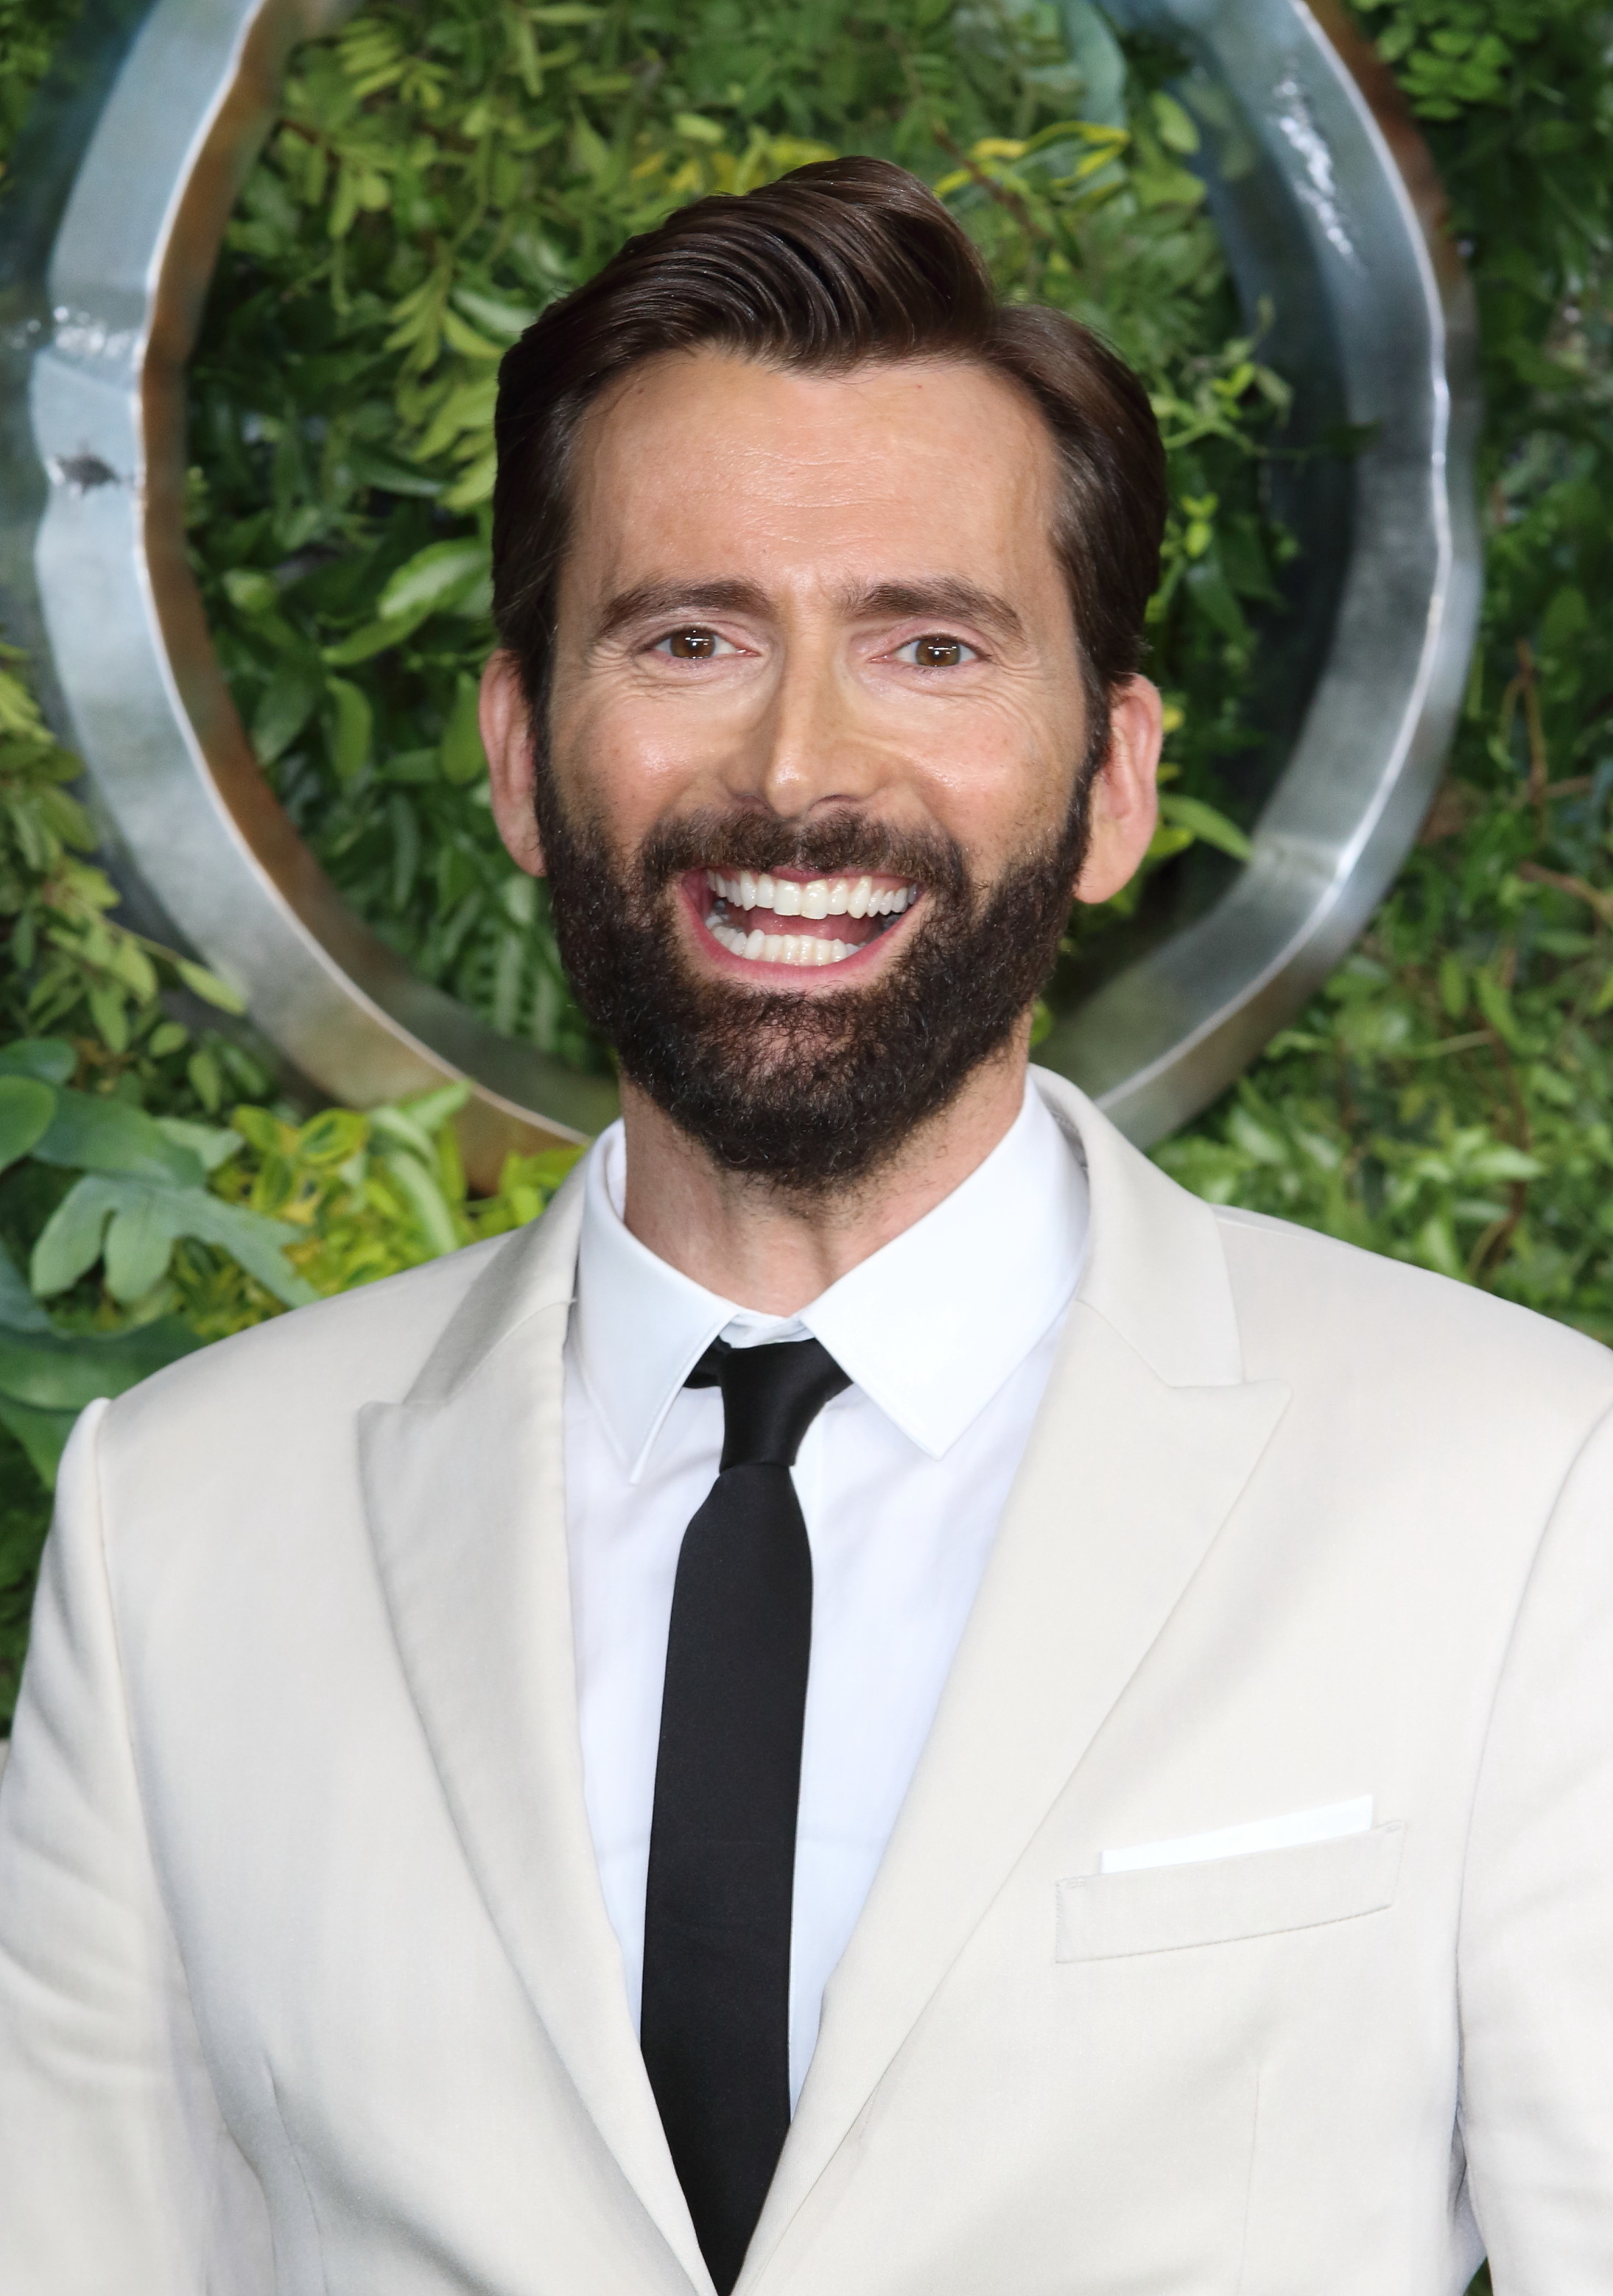 David wearing a suit for an event